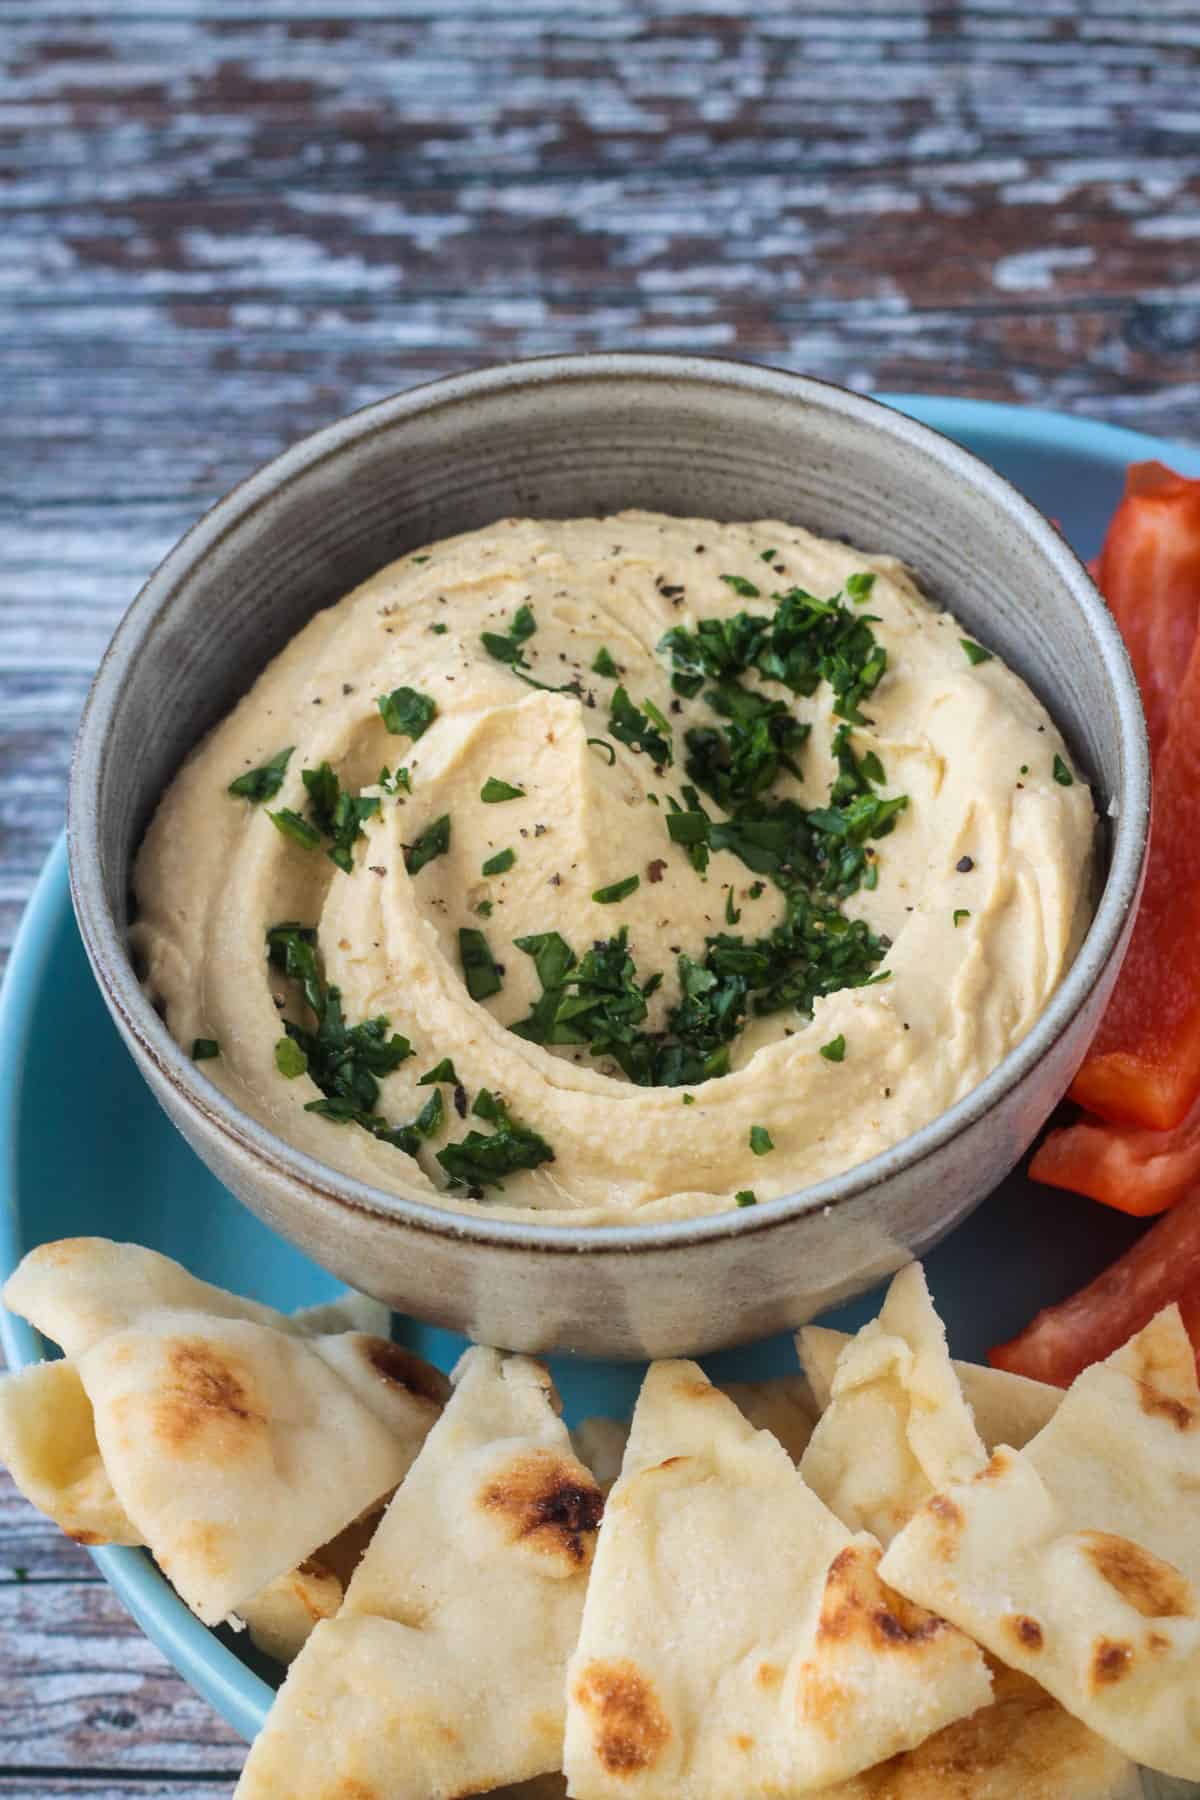 Creamy oil free hummus topped with fresh chopped parsley in a gray bowl.